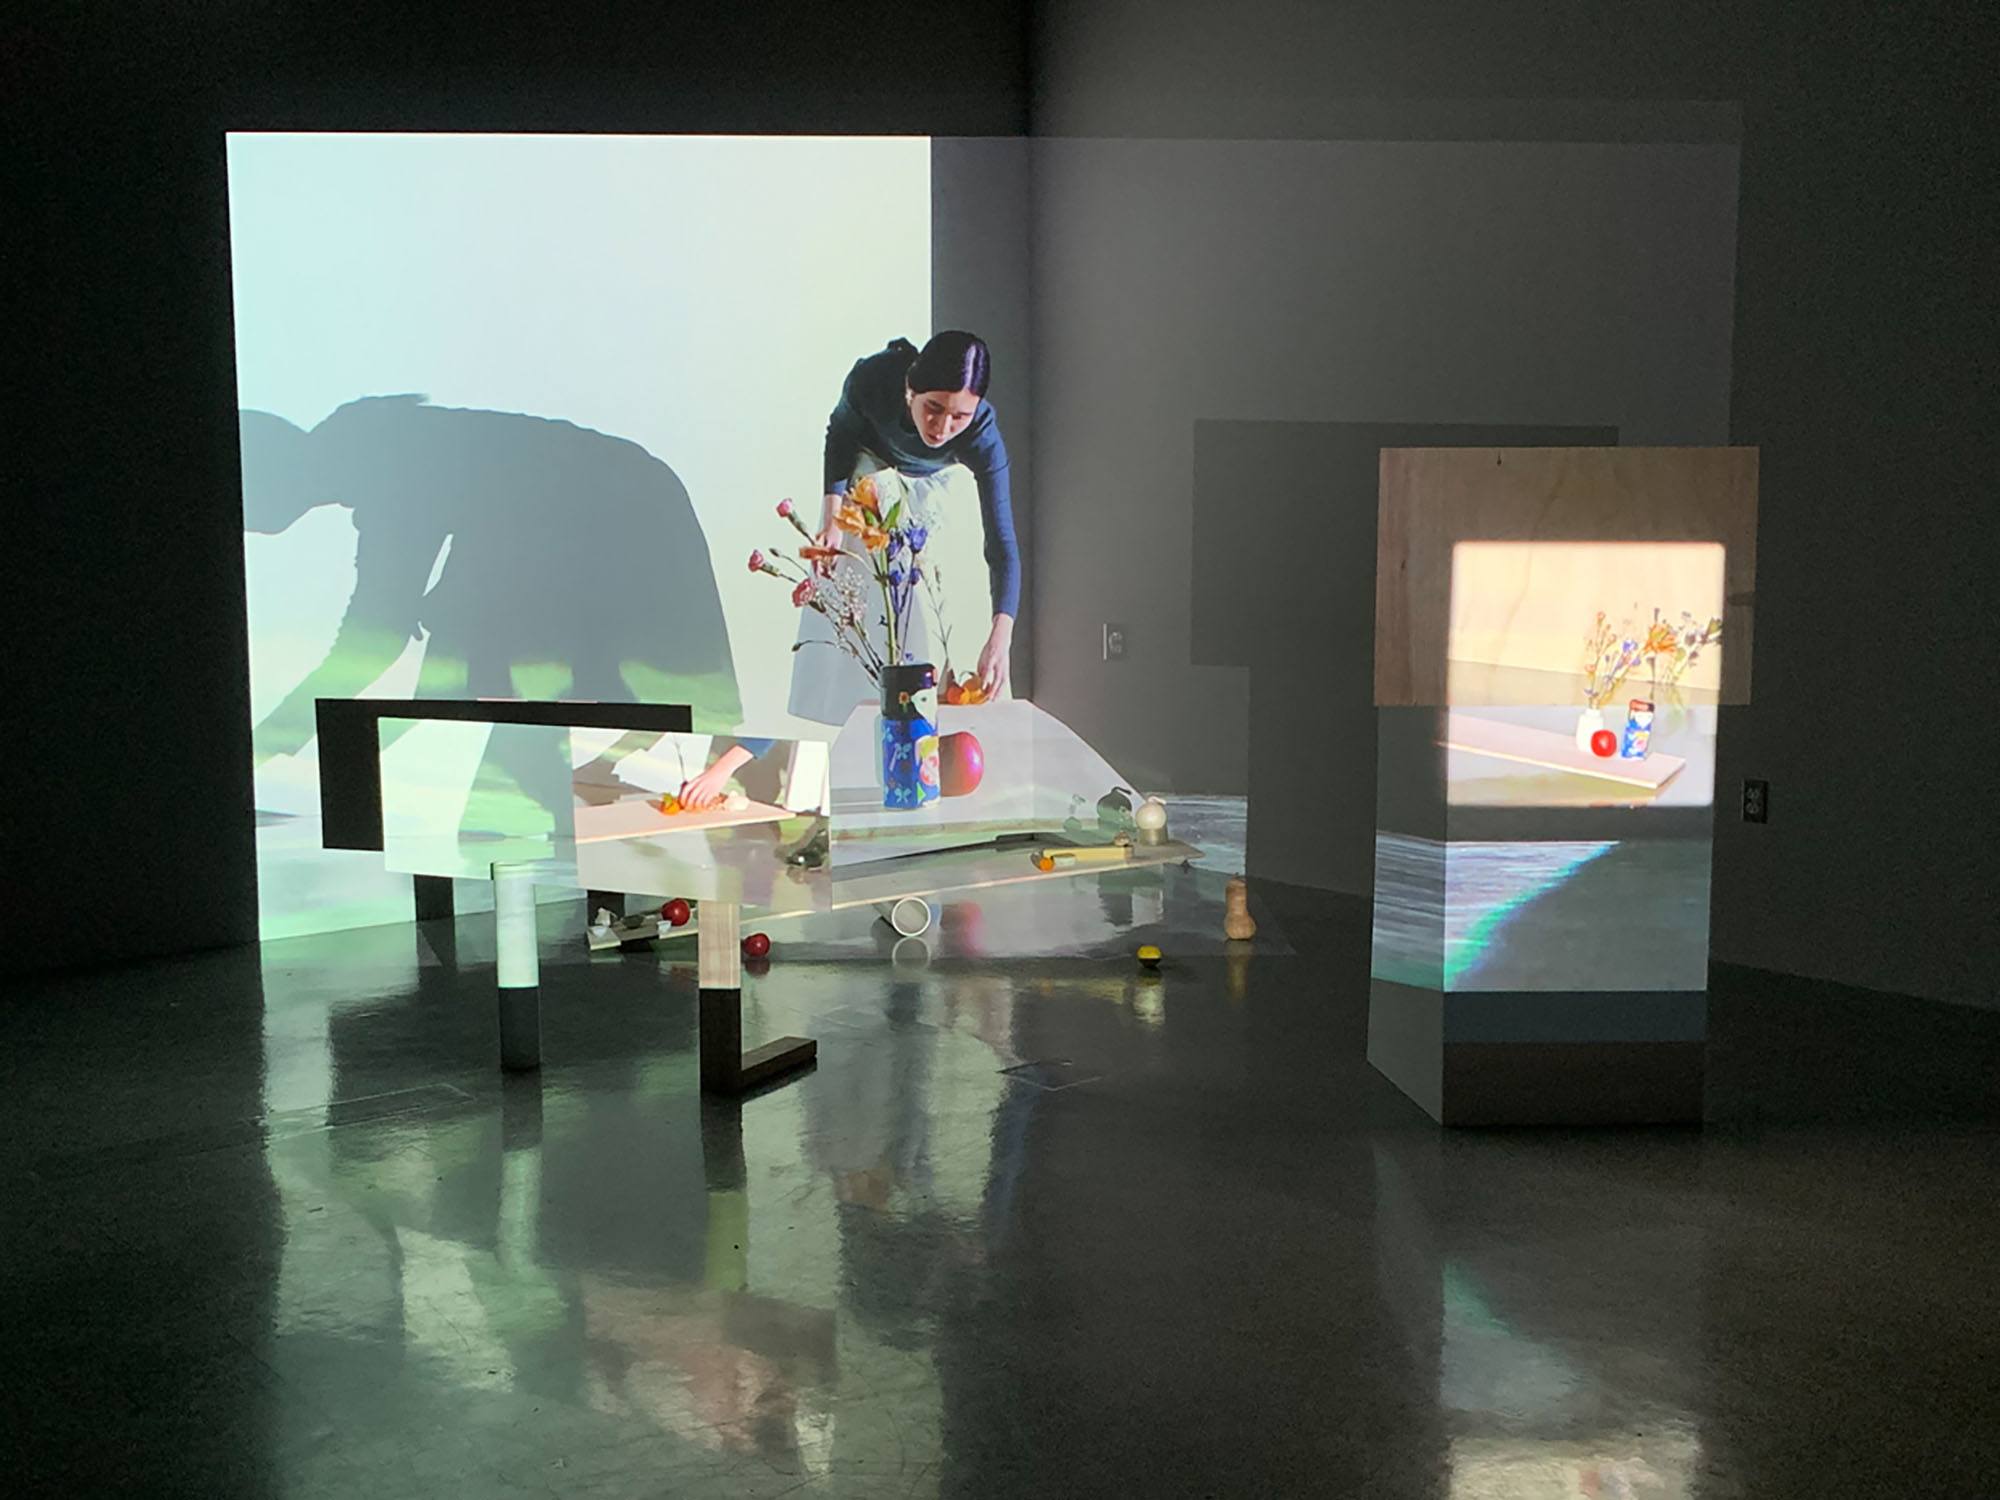 A gallery installation with projections on multiple surfaces